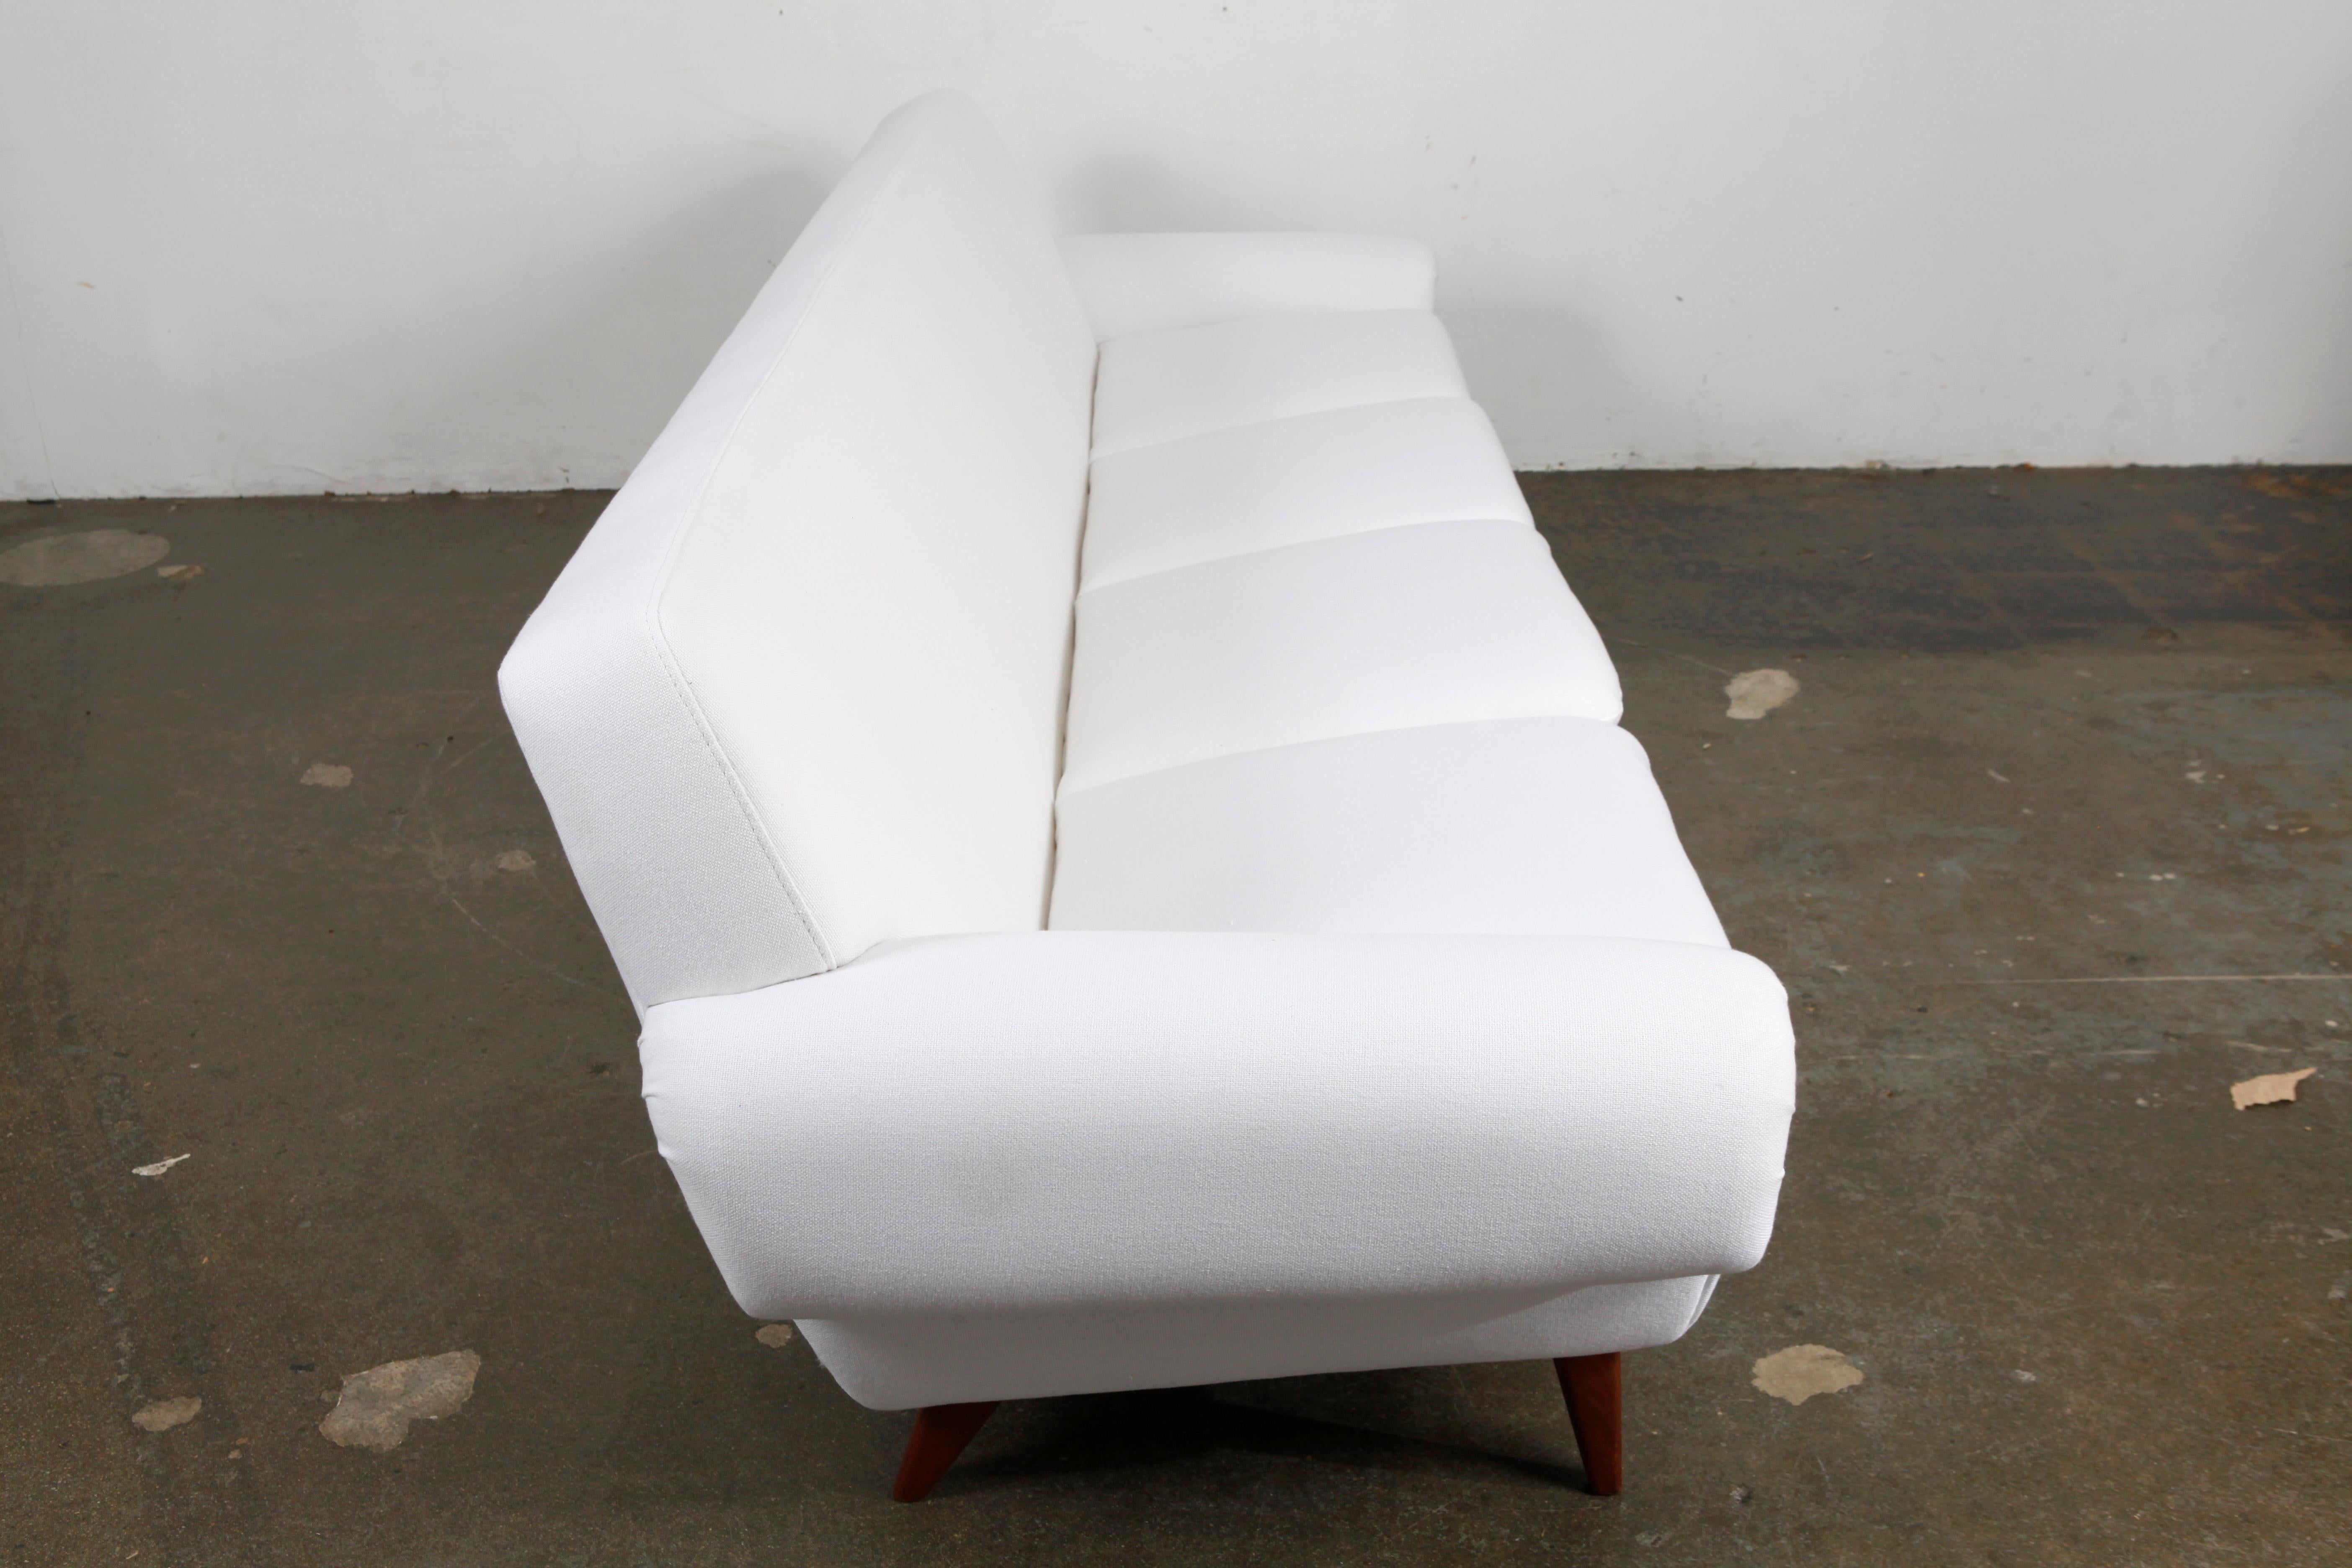 Beautiful four-seat loose seat and back cushion midcentury Danish sofa newly upholstered in a white fabric that has been treated with a non-toxic stain resistant coating, Denmark, circa 1960s.